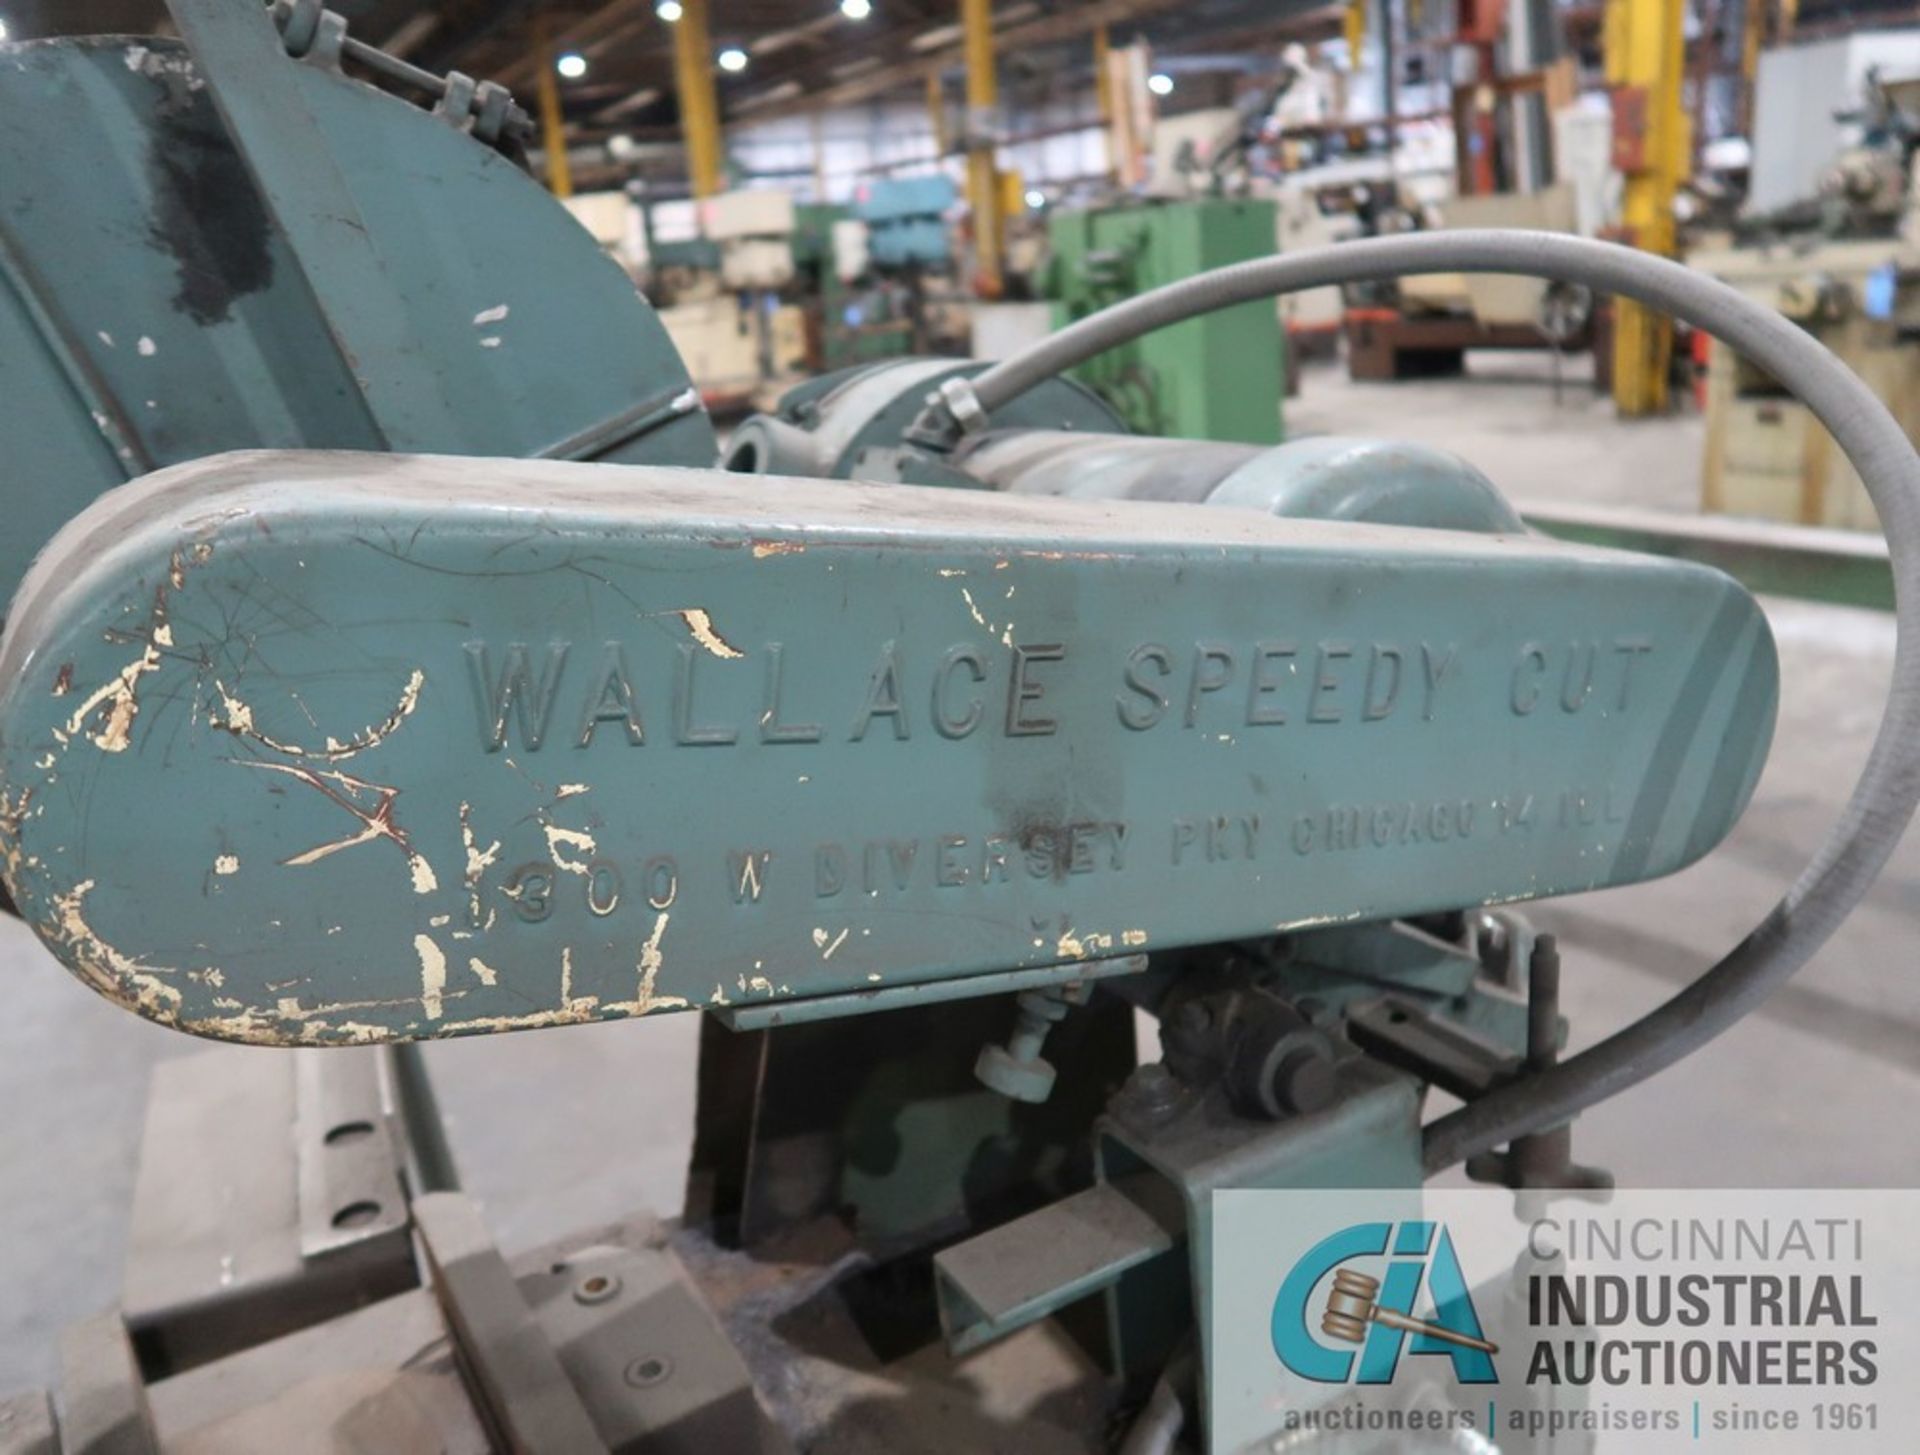 16" BLADE DIAMETER APPROX. WALLACE SPEEDY CUT ABRASIVE CUT-OFF SAW S/N N/A 10" PNEUMATIC CLAMP, - Image 4 of 4